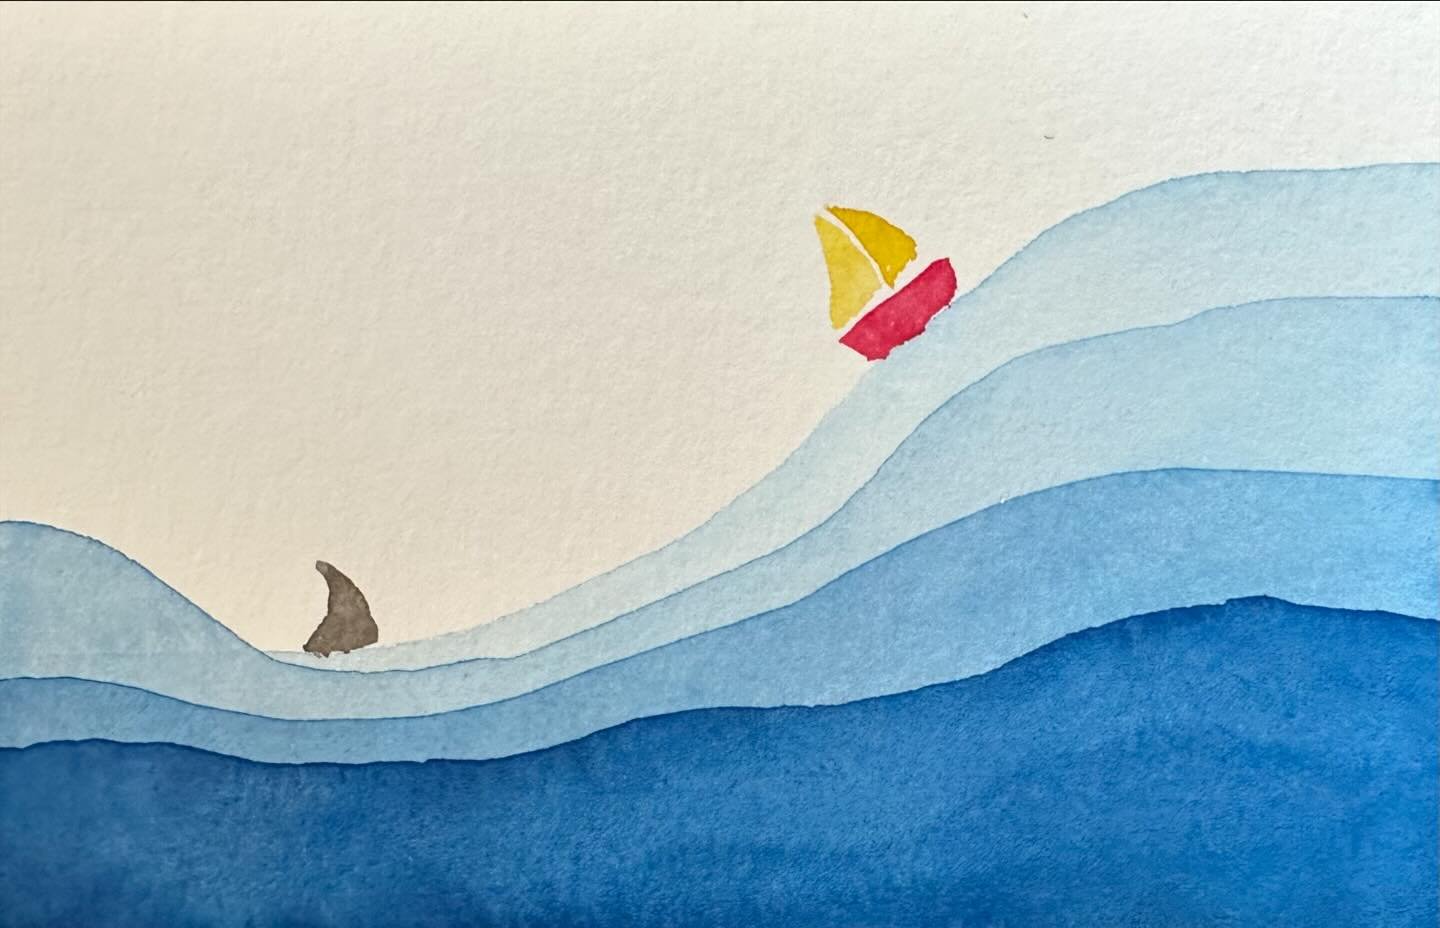 A little boat on waves painted on a postcard. From the book No-Fail Watercolor. 

#letsmakeartwatercolor #letsmakeart #watercolor #watercolorpainting